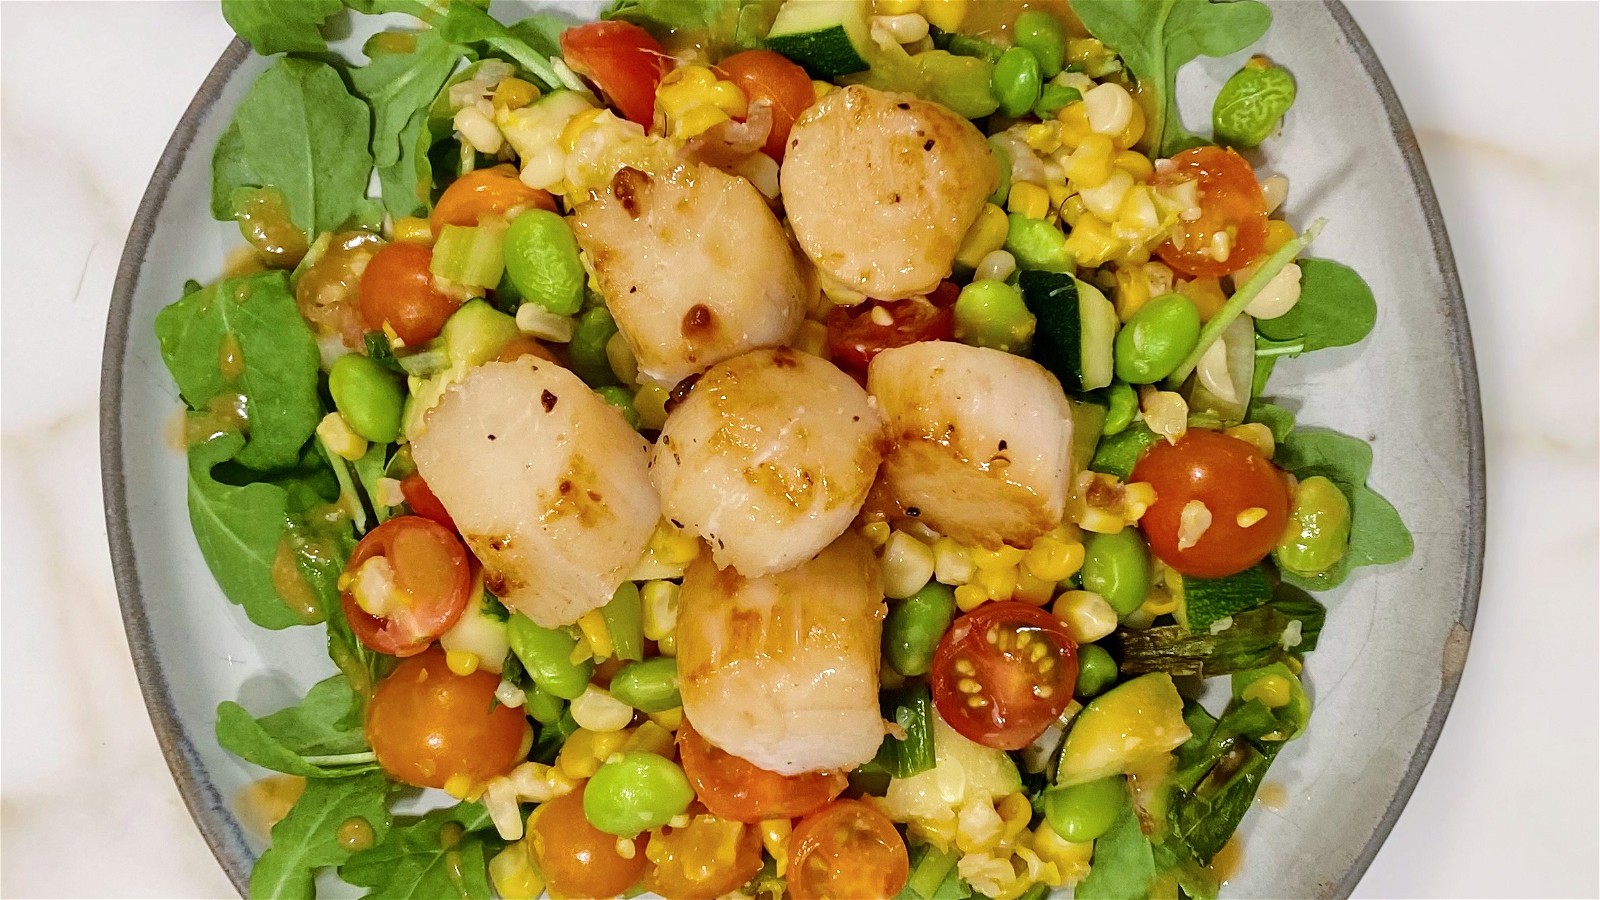 Image of Seared Scallops with Miso-Corn Salad